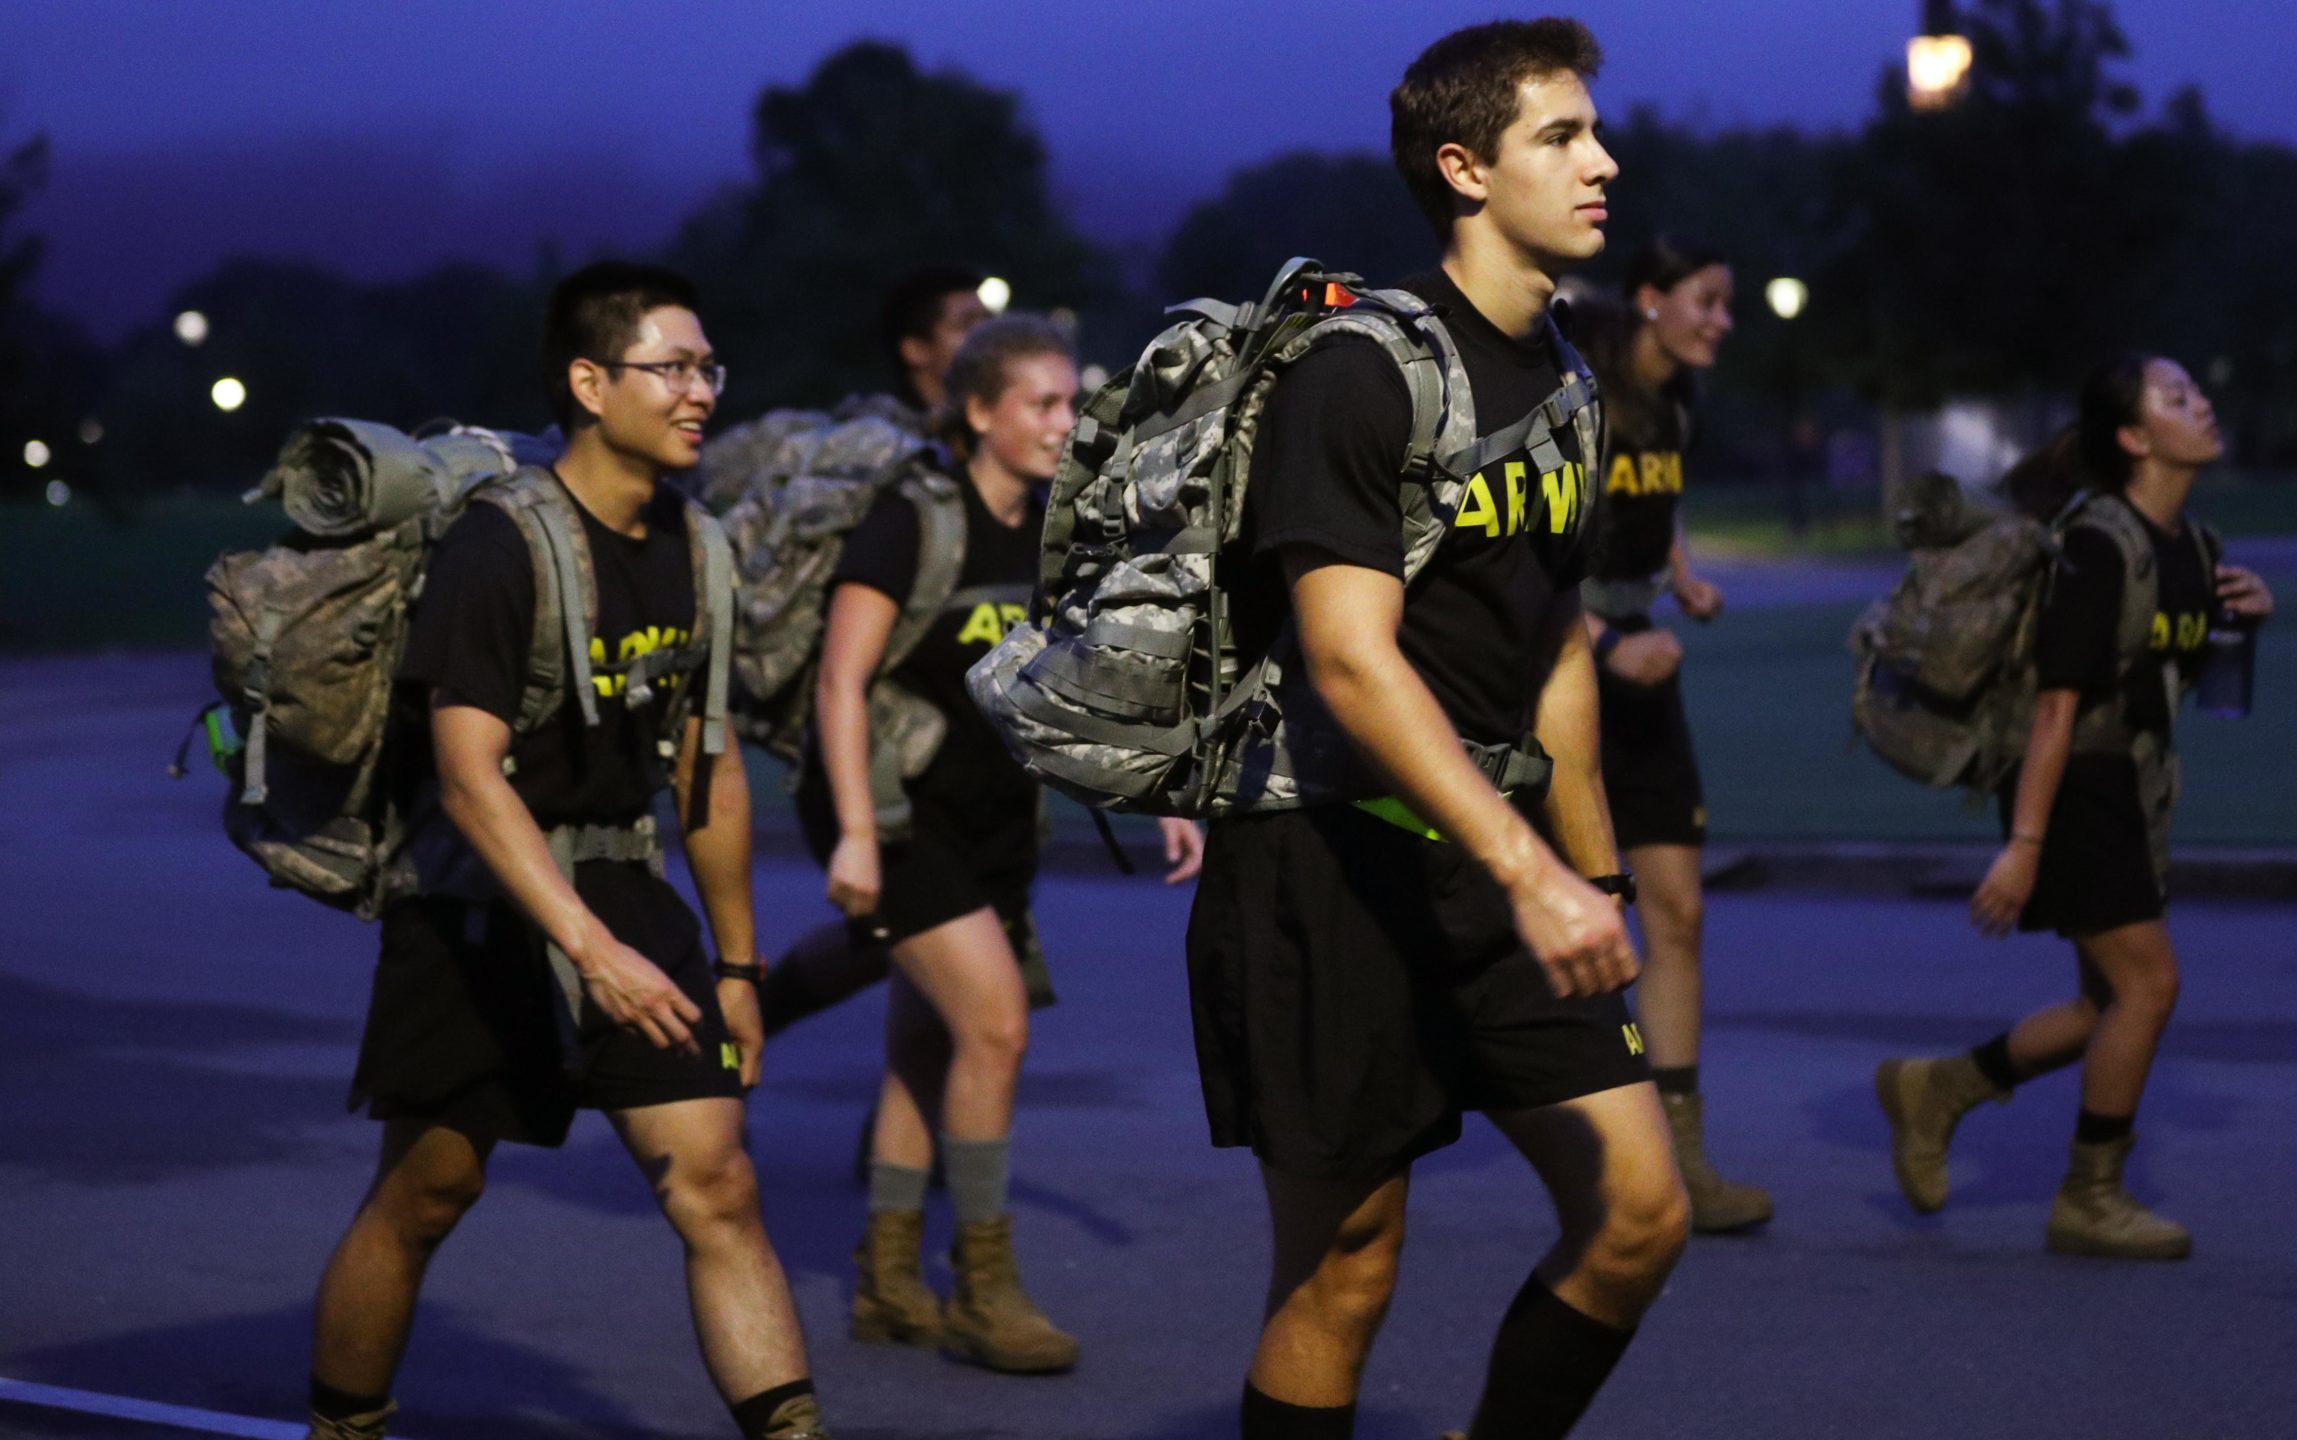 ROTC Students doing a Ruck